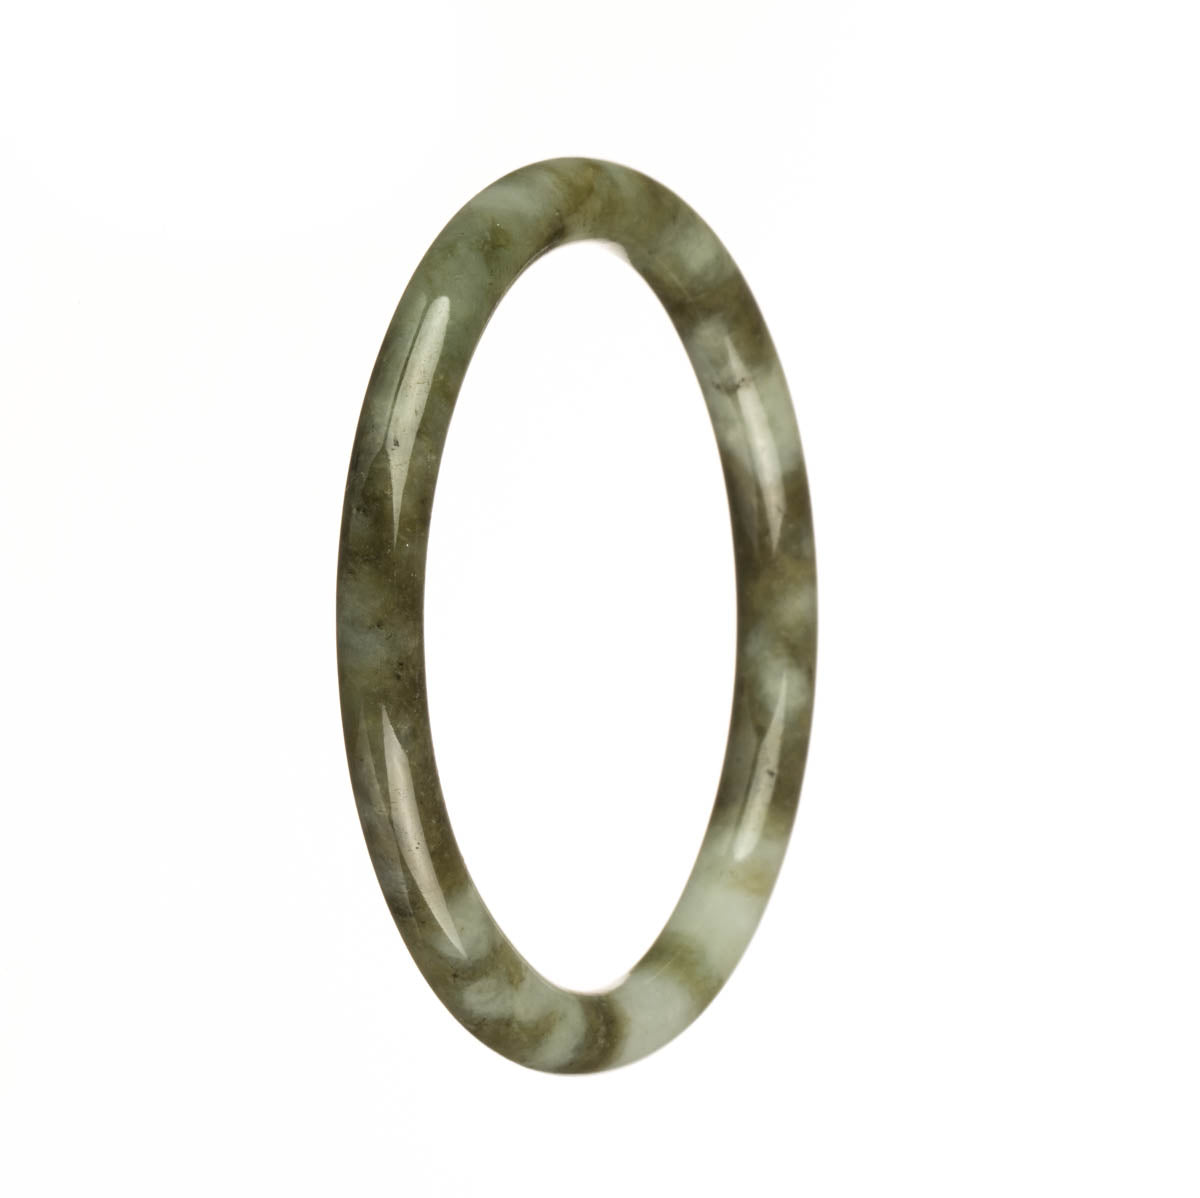 An elegant and petite round jadeite jade bangle with authentic Type A white and olive green patterns. Perfect for adding a touch of sophistication to any outfit.